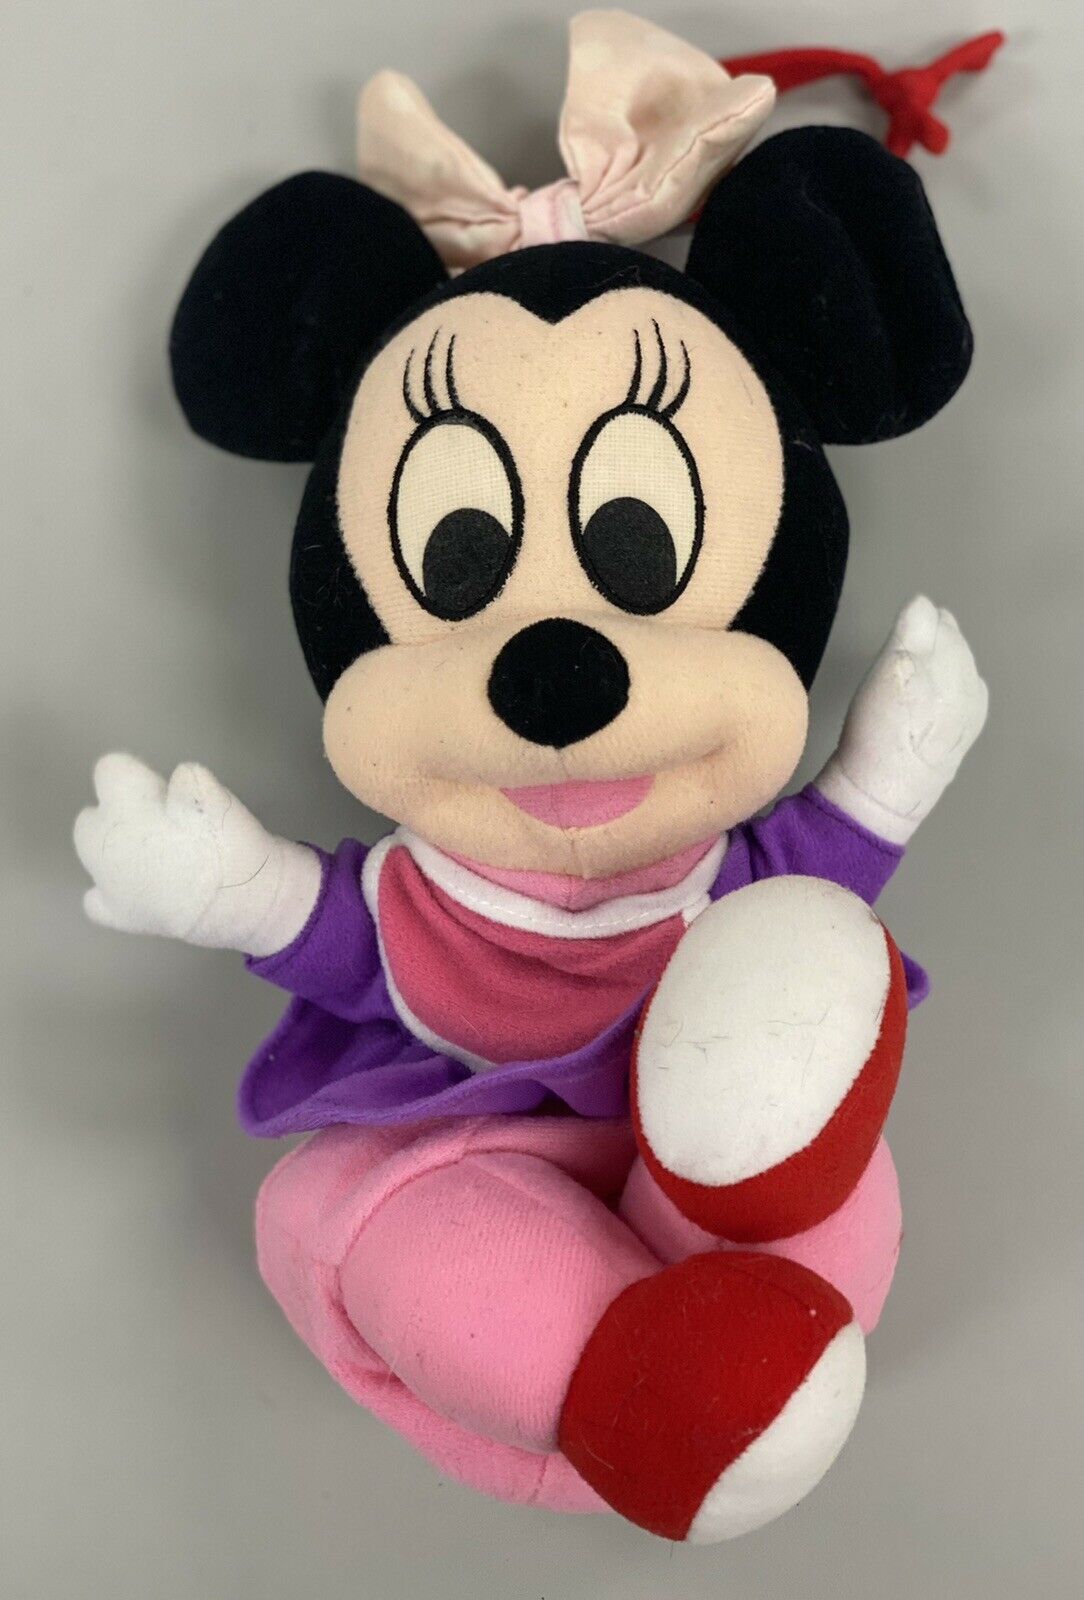 Disney Minnie Mouse Musical Pull Toy Plays Music Baby Crib Car Seat Plush Infant